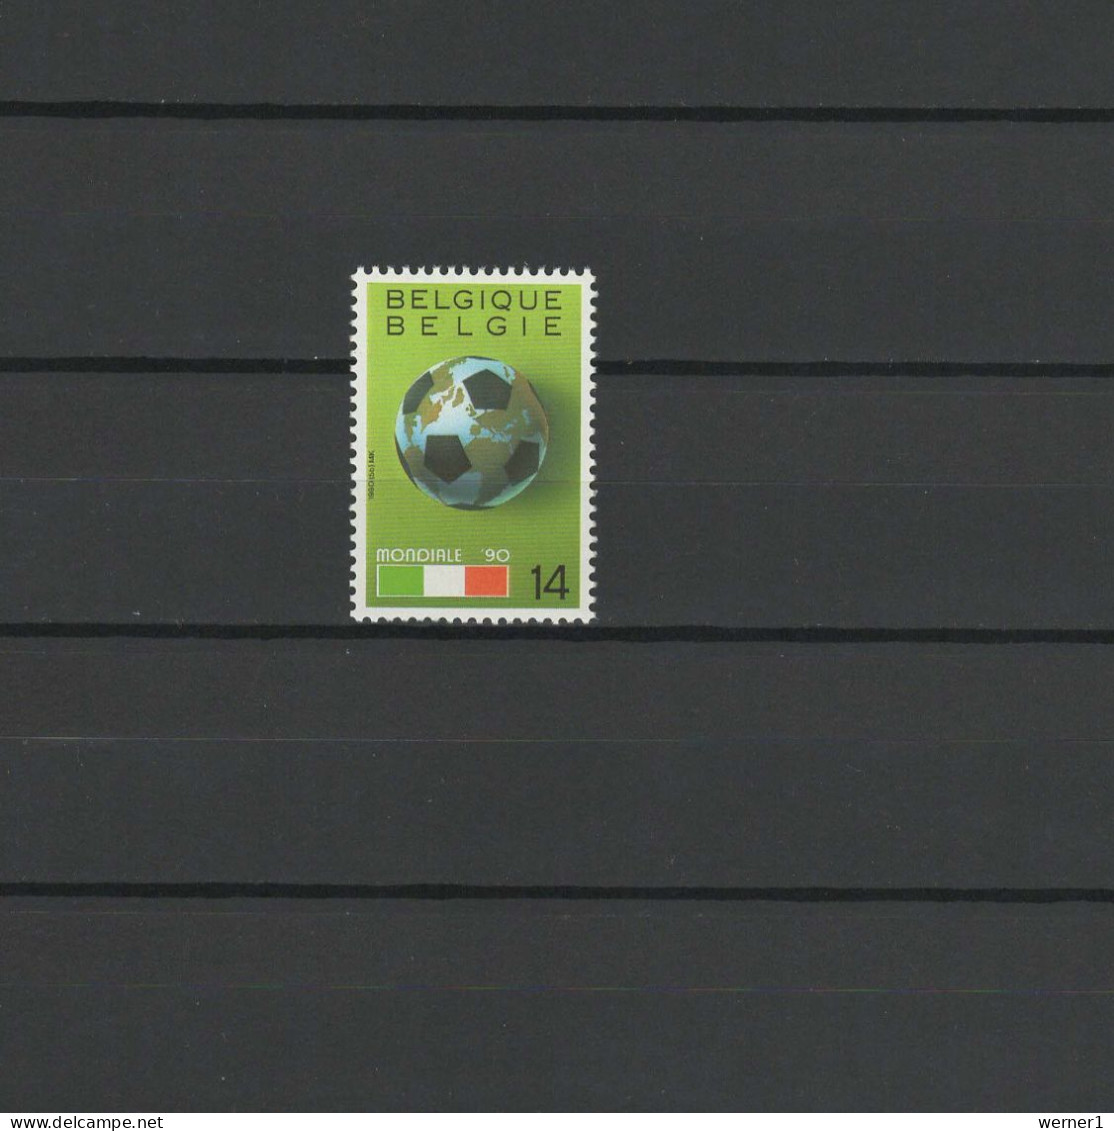 Belgium 1990 Football Soccer World Cup Stamp MNH - 1990 – Italy